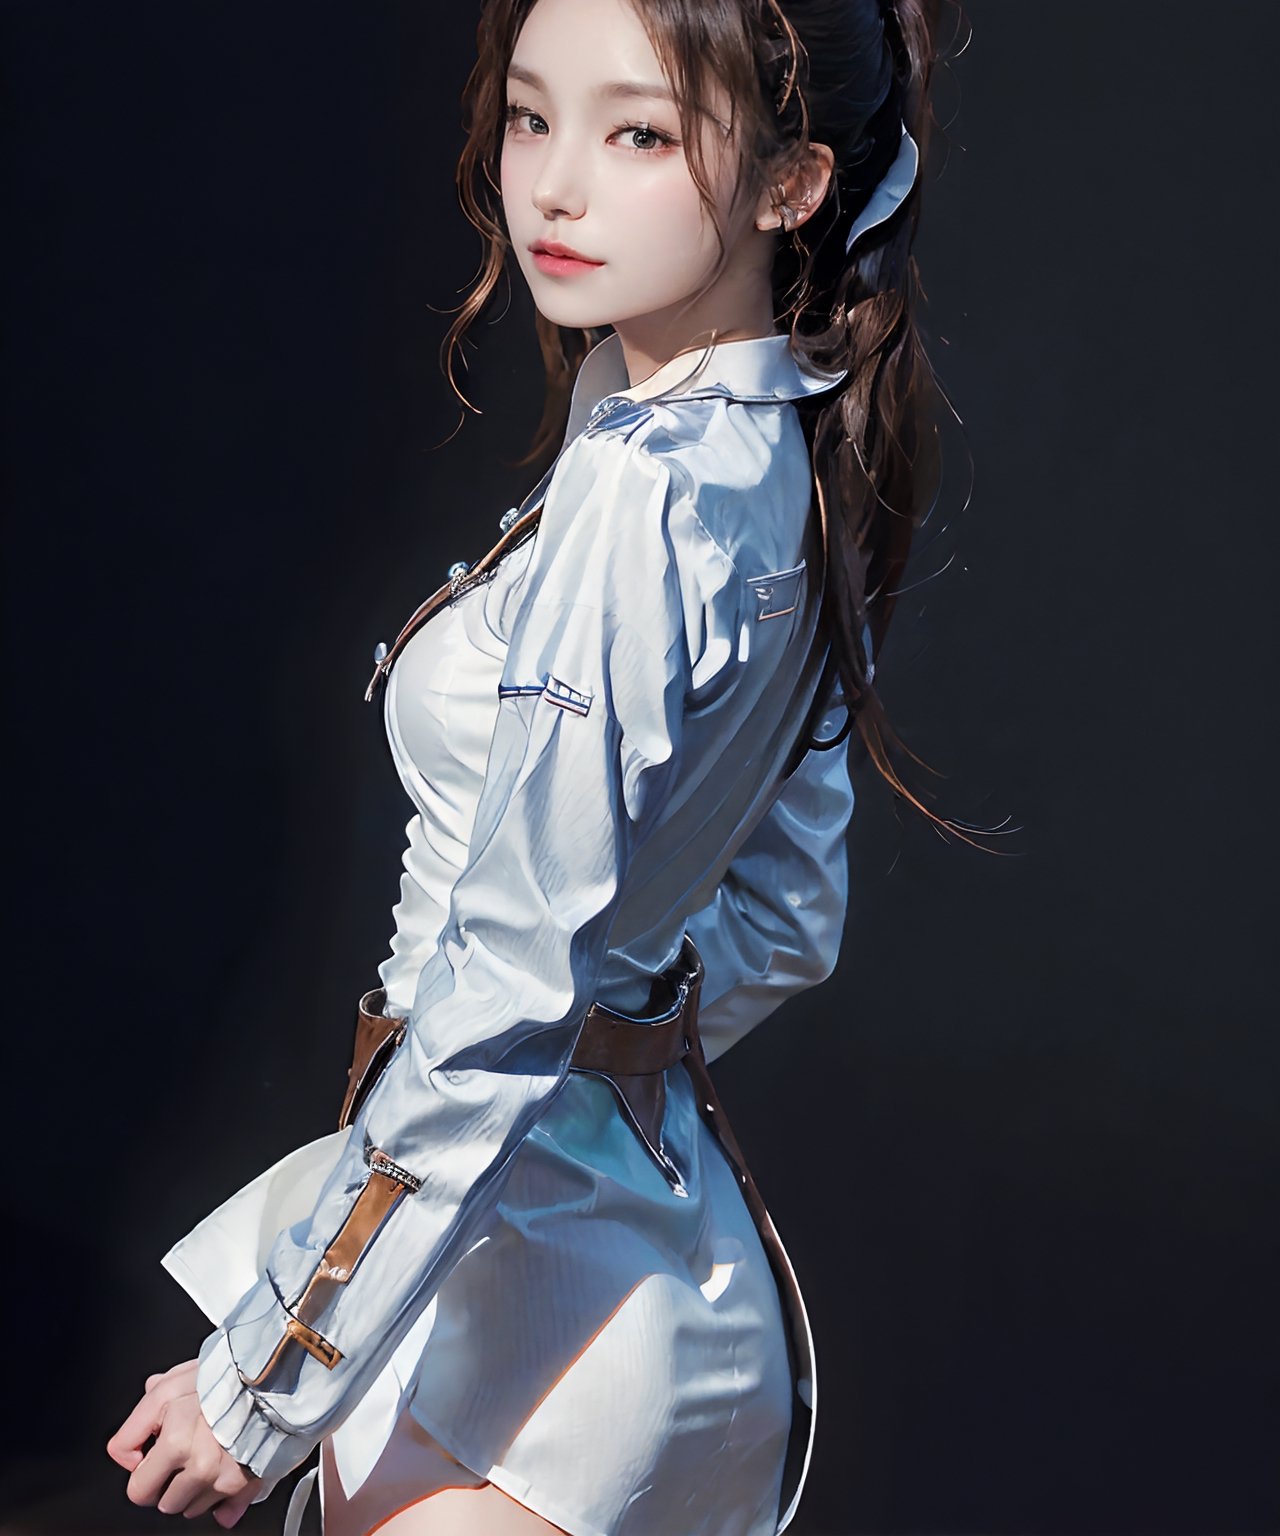 (look at the viewer:1.2), (cowboy shot:1.8), (portrait from just in front, slightly below:1.2), 24 years old lady standing, facing straight at viewer, pale blue background, (from breasts to head in frame, straight on), (masterpiece, wallpaper, RAW photo, highest quality, ultra-detailed, absurdres, photo-realistic), (extremely skin-tight white shirt with collar, long sleeves, fully buttoned, rolled-up sleeves:1.4), a hand behind back of neck, elegant, classy, formal, serious, high fashion, small head, (long neck:1.2), broad forehead, (smile:0.3), (cheek:1.4), pale skin, french braid ponytail, (LARGE BREASTS:0.5), Luxury sneakers, professional lighting,
,more detail 